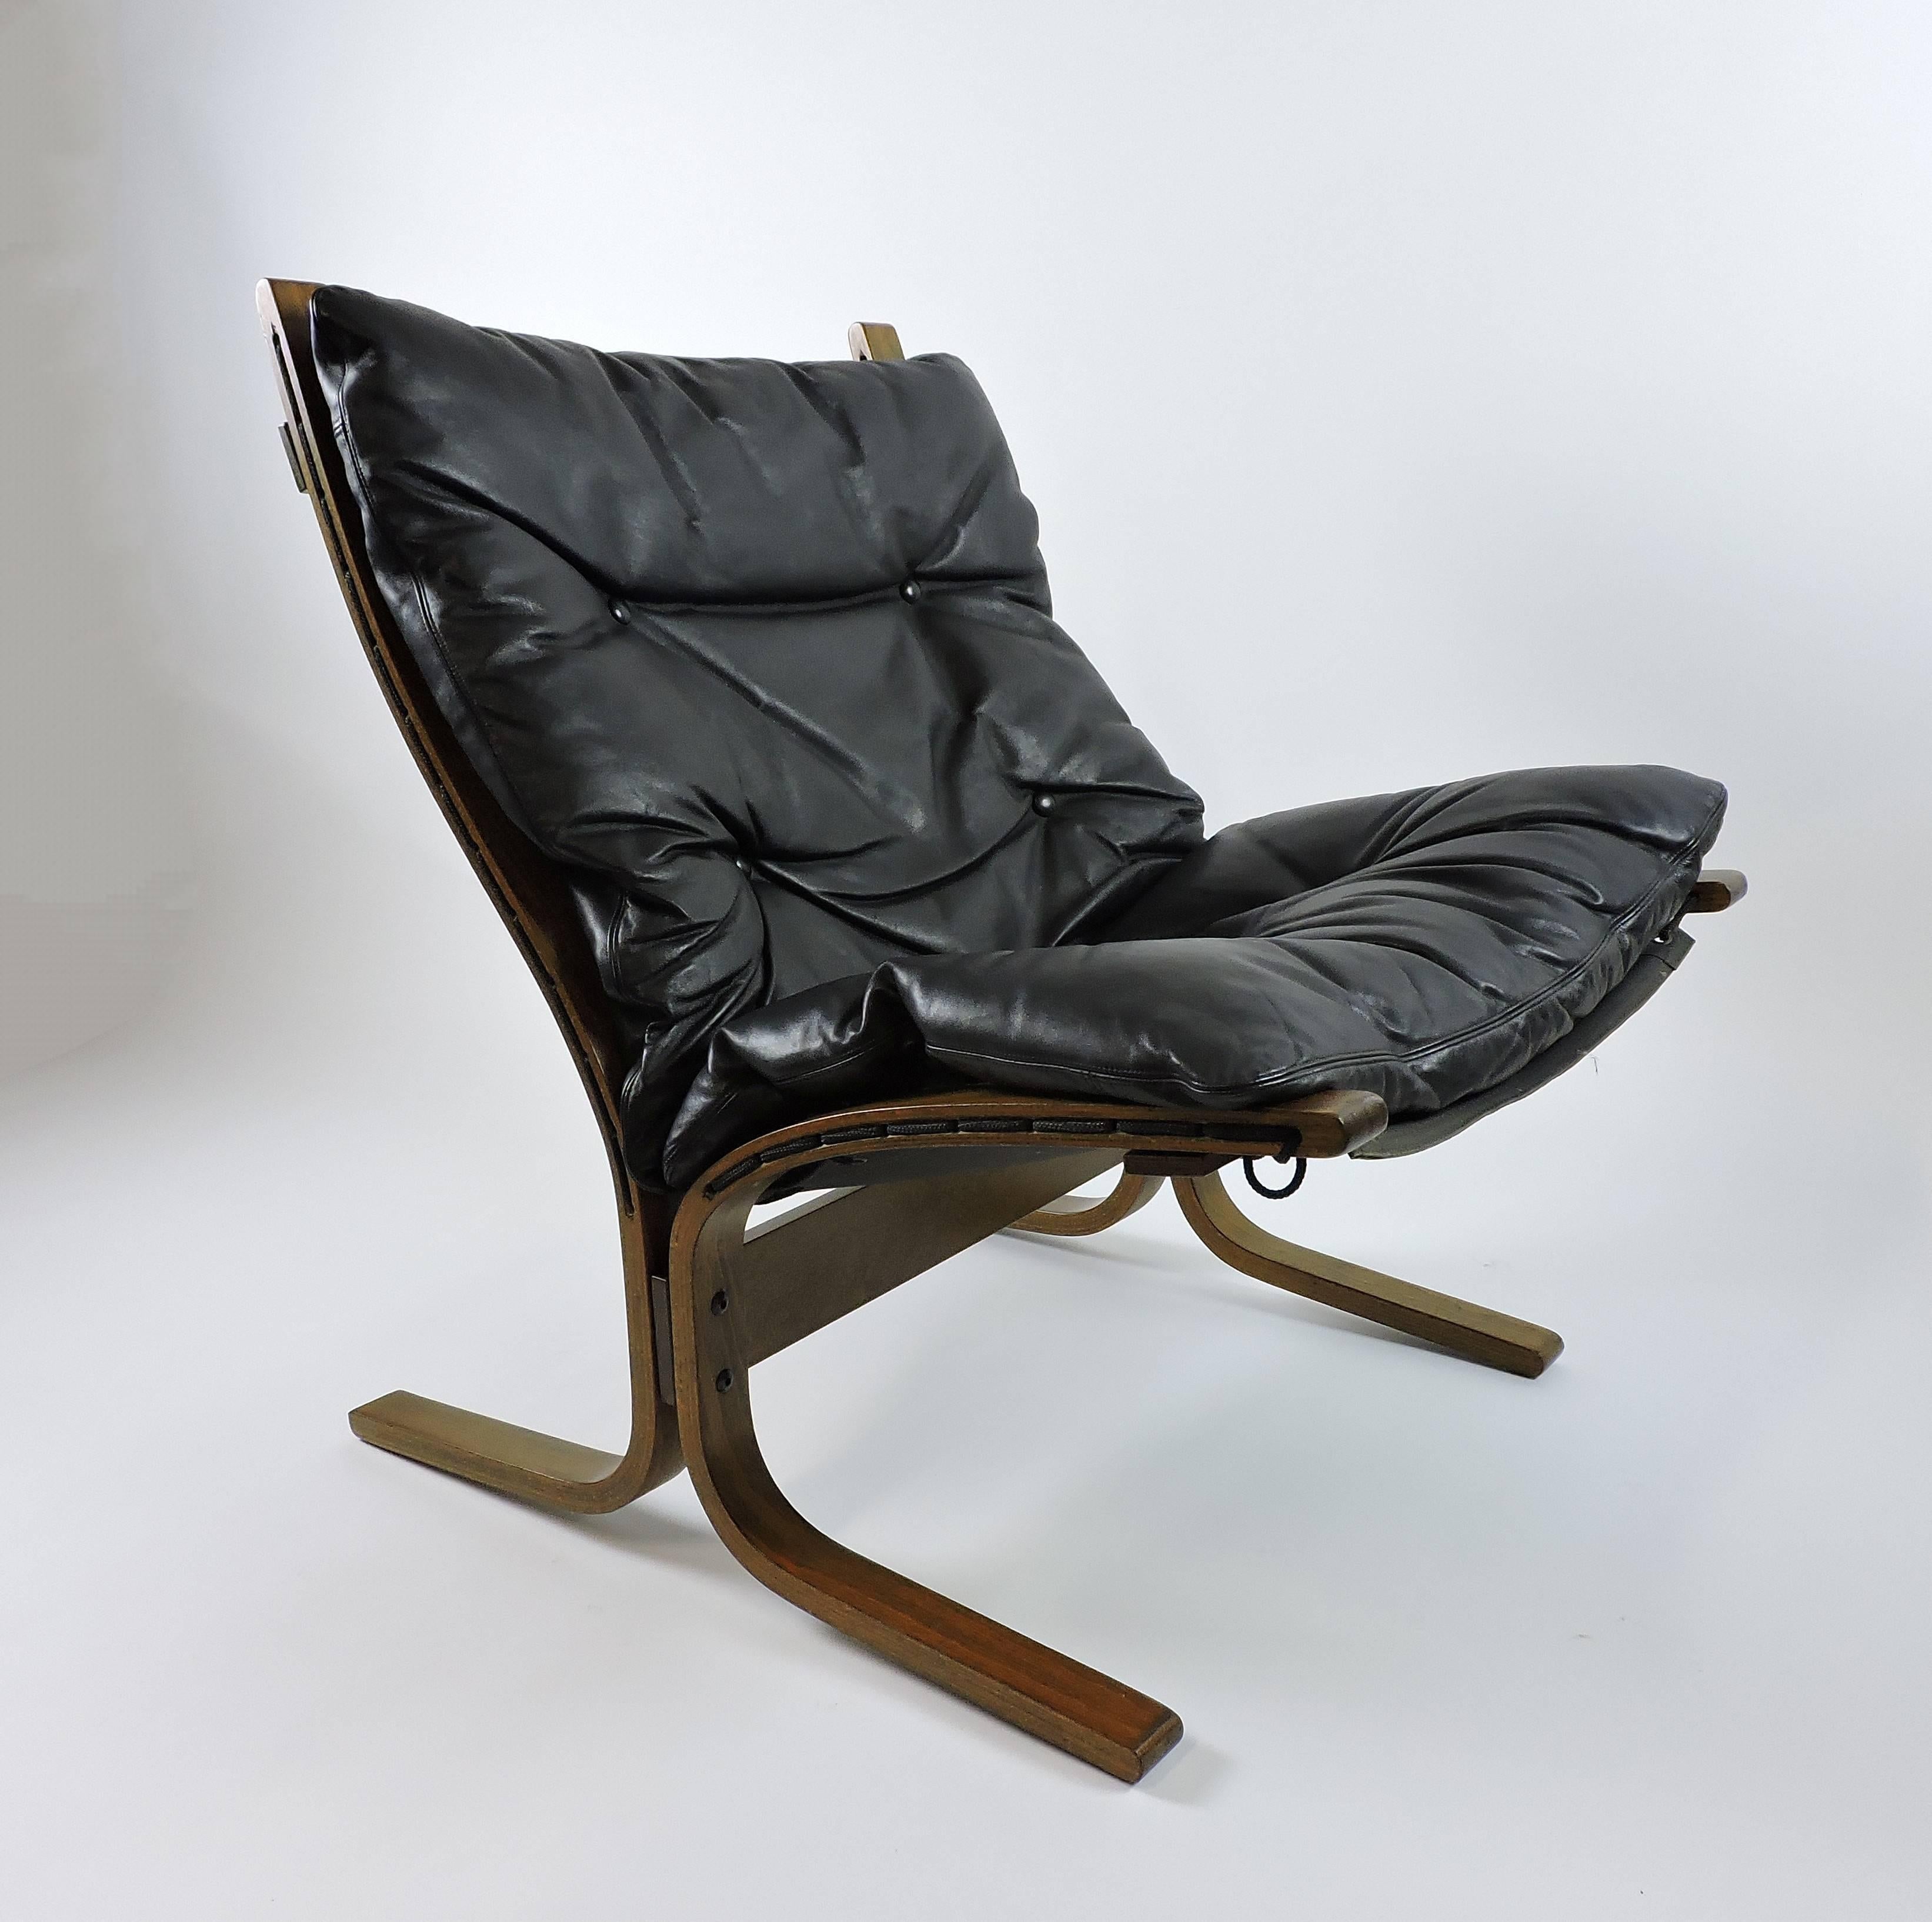 Sleek and sexy Siesta lounge chair designed by Ingmar Relling and made in Norway by Westnofa. This award winning chair has a bentwood frame with a black leather cushion that sits on a canvas sling. Labelled with a Westnofa Furniture Made in Norway,